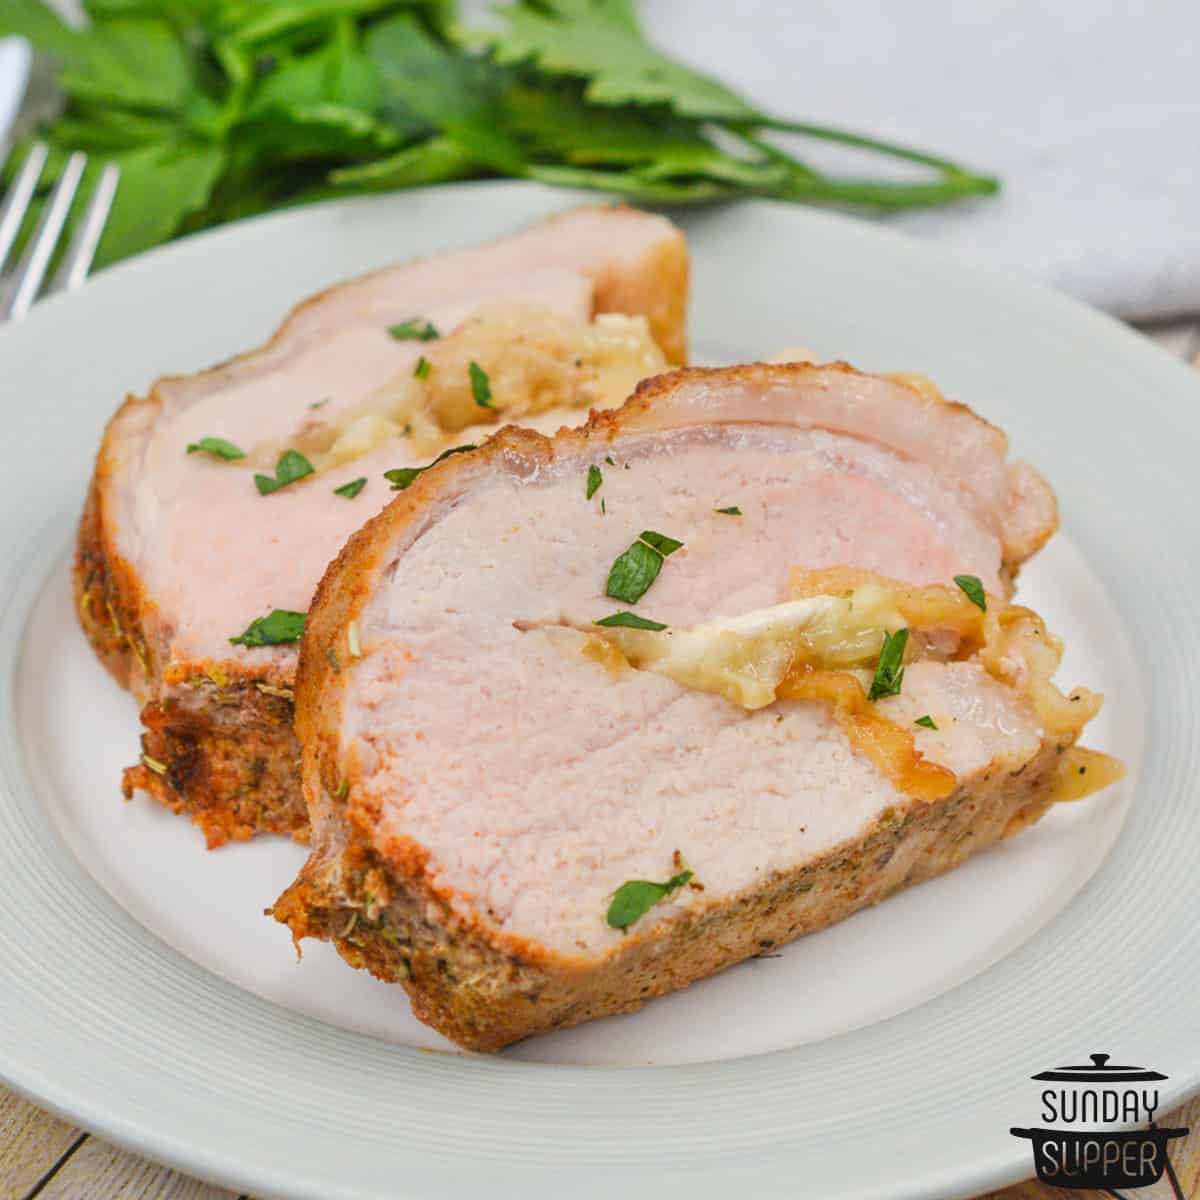 slices of stuffed pork tenderloin to show the cheese and onions